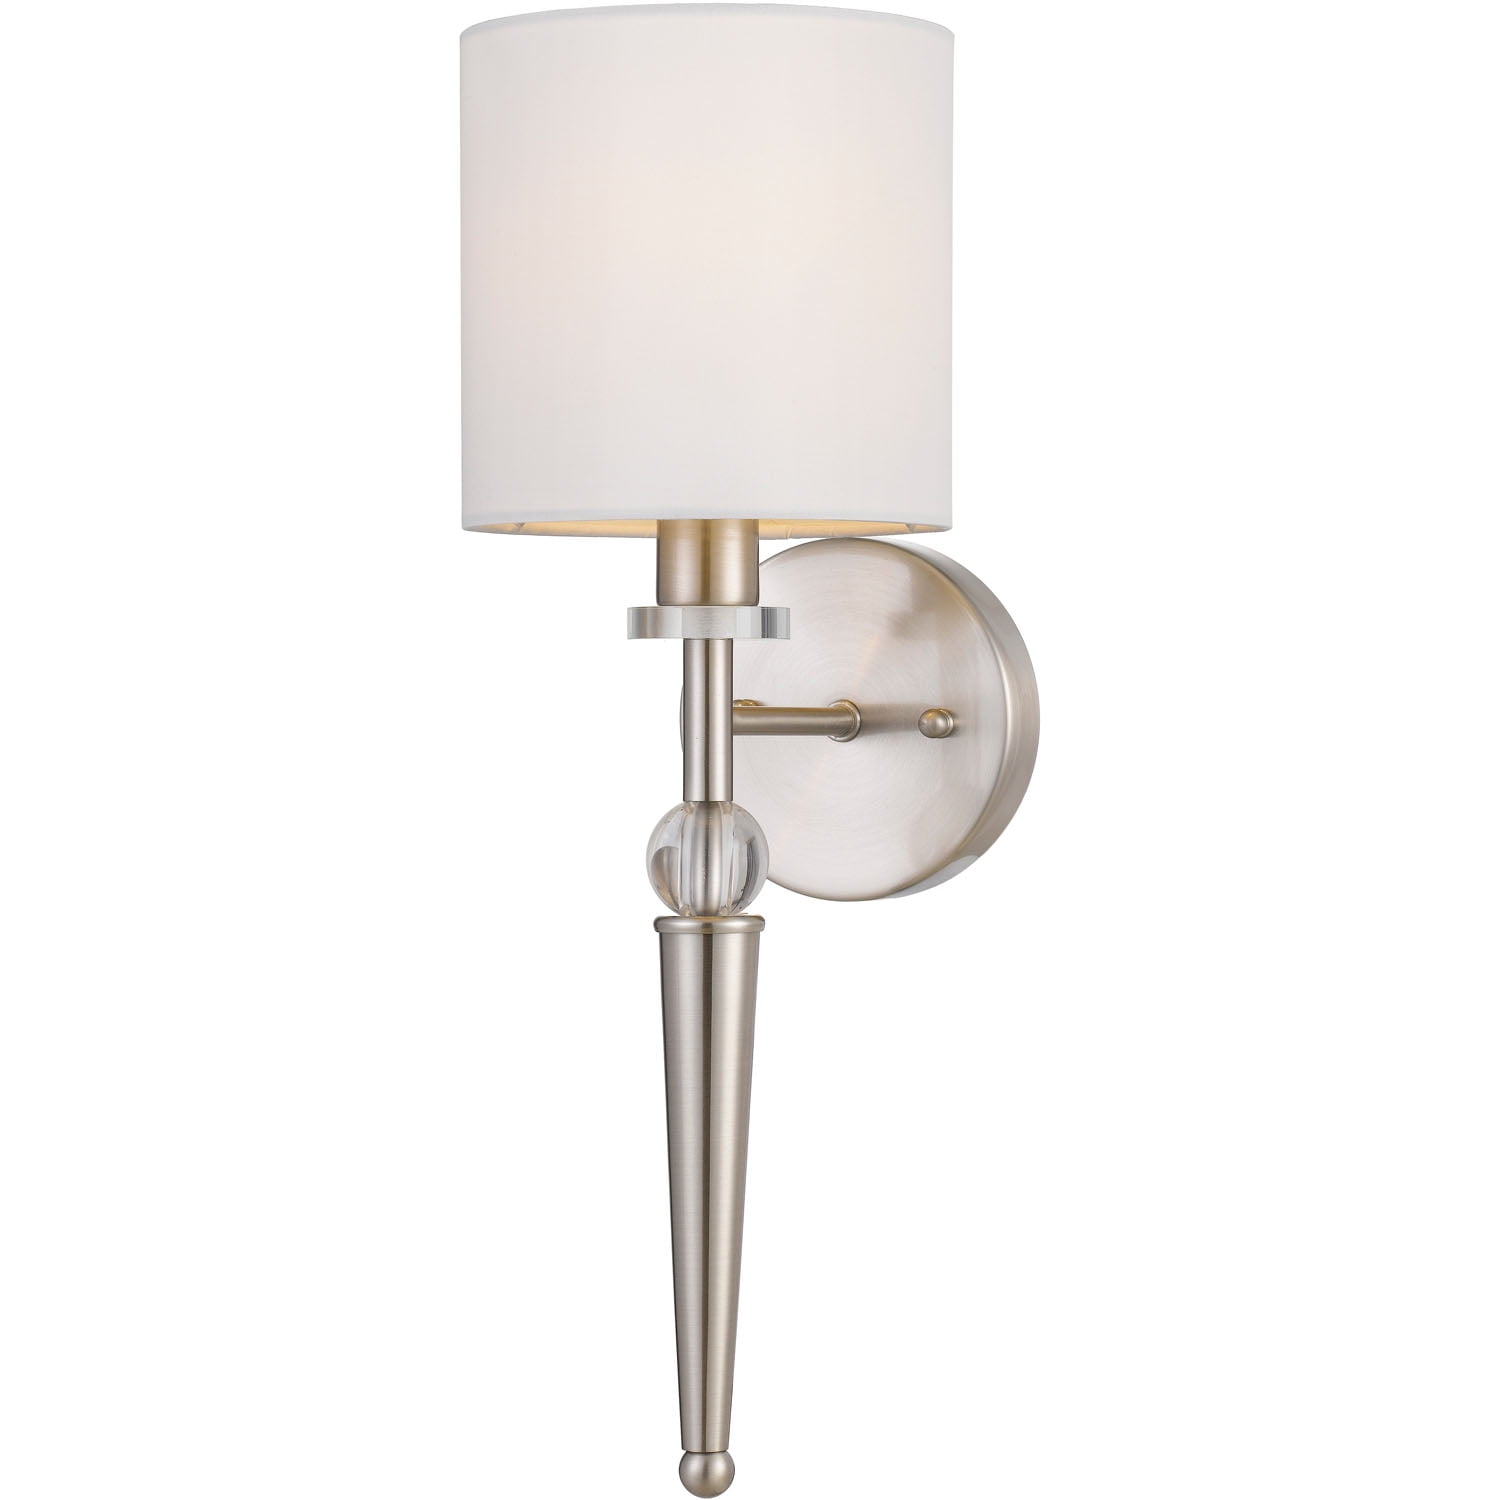 Picture of AF Lighting 9143-1W Merritt Wall Sconce, Satin Nickel